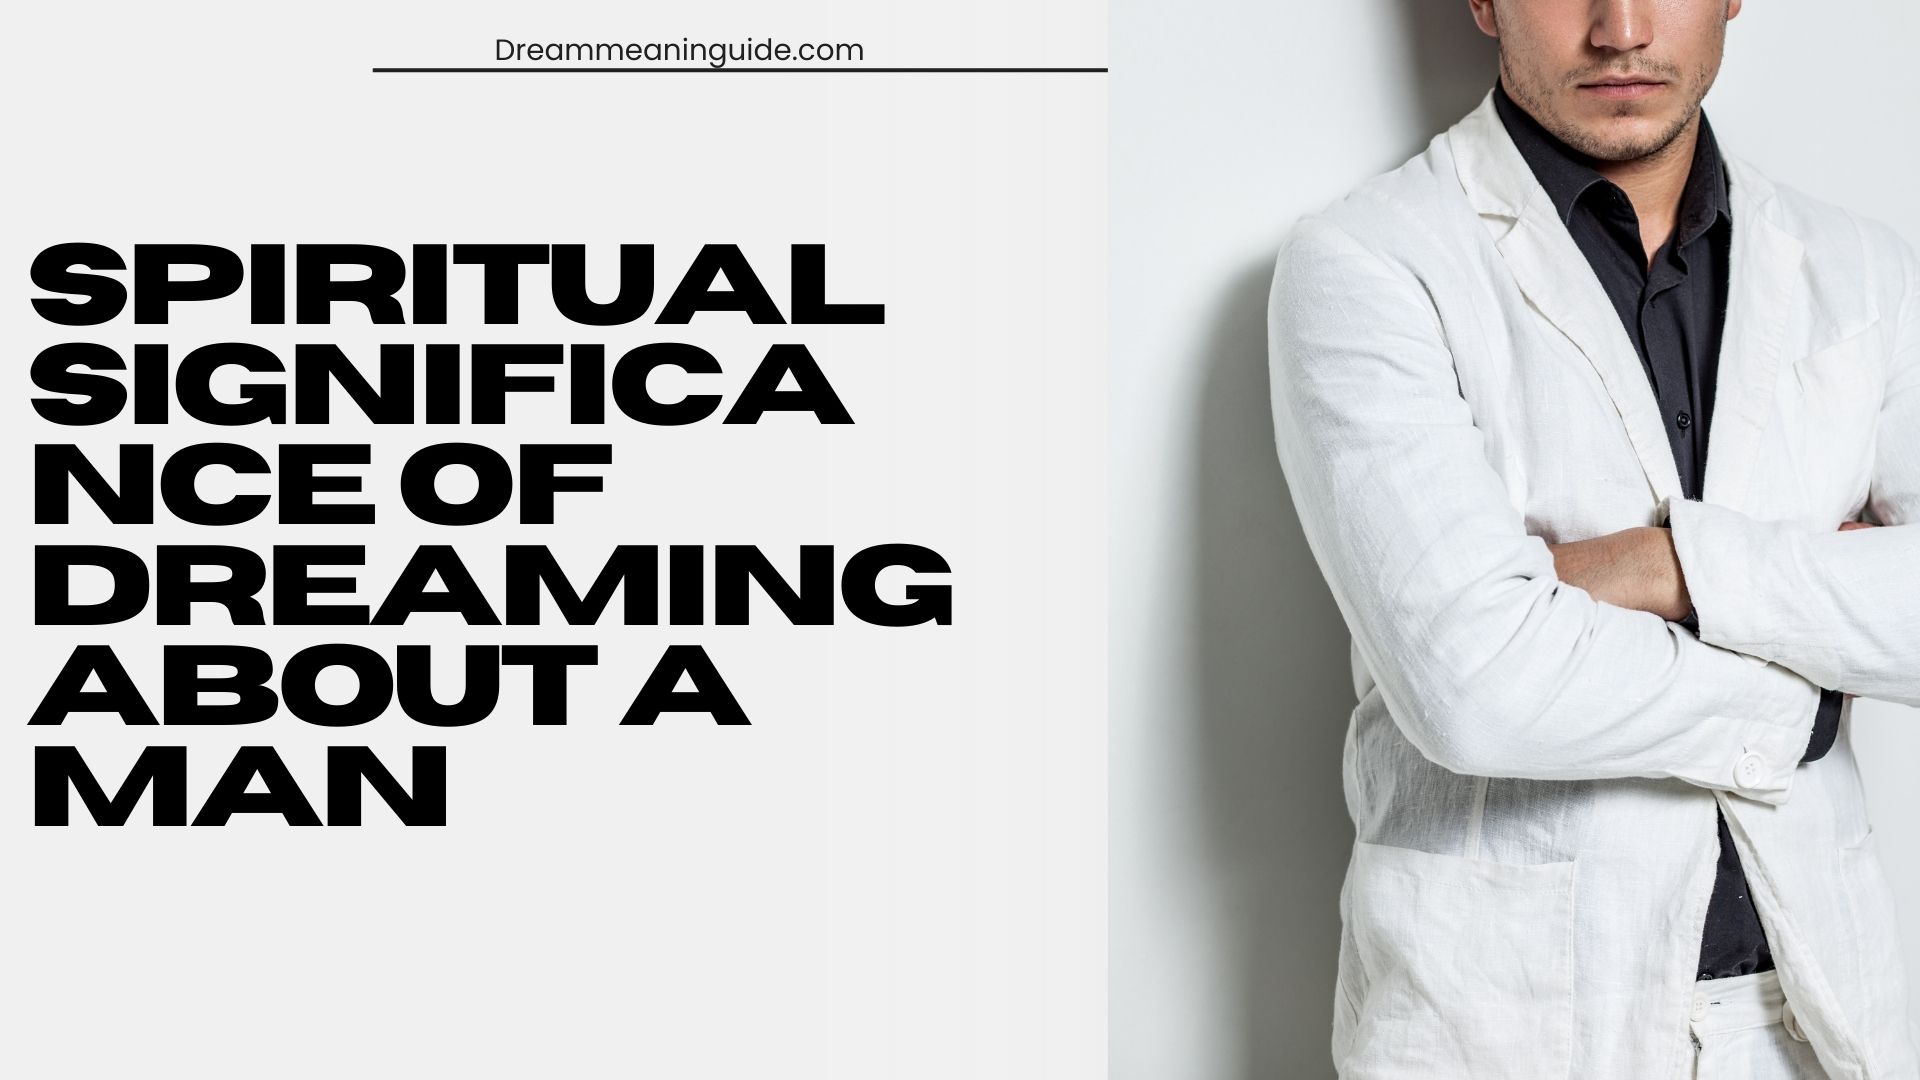 Spiritual Significance of Dreaming about a Man